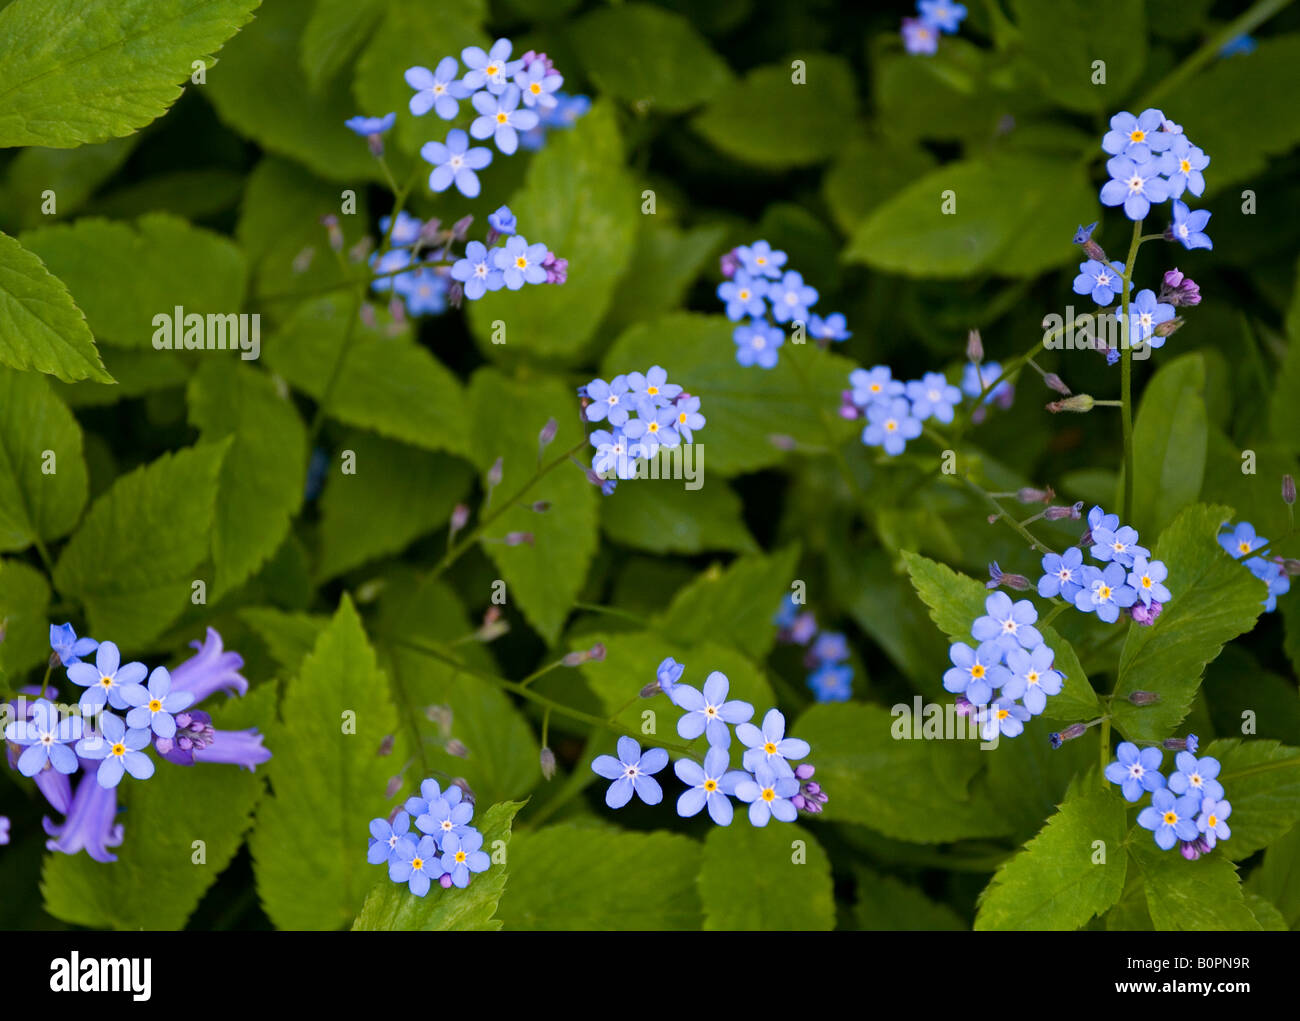 Forget-me-not plants growing in woodland in spring Derbyshire England UK genus Mysotis family Boraginaceae Stock Photo